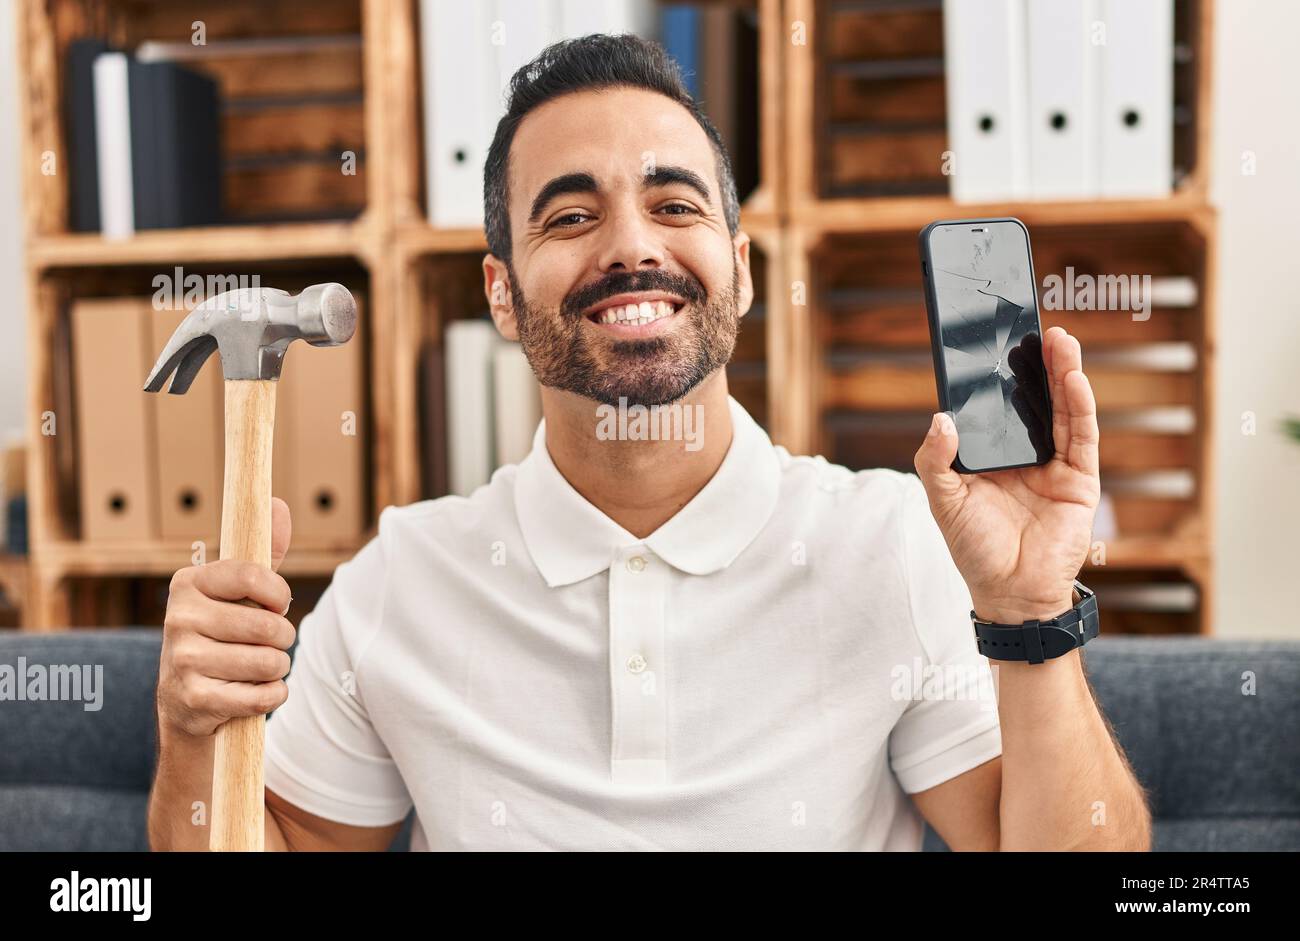 Young hispanic man with beard holding hammer and broken smartphone showing  cracked screen smiling with a happy and cool smile on face. showing teeth  Stock Photo - Alamy